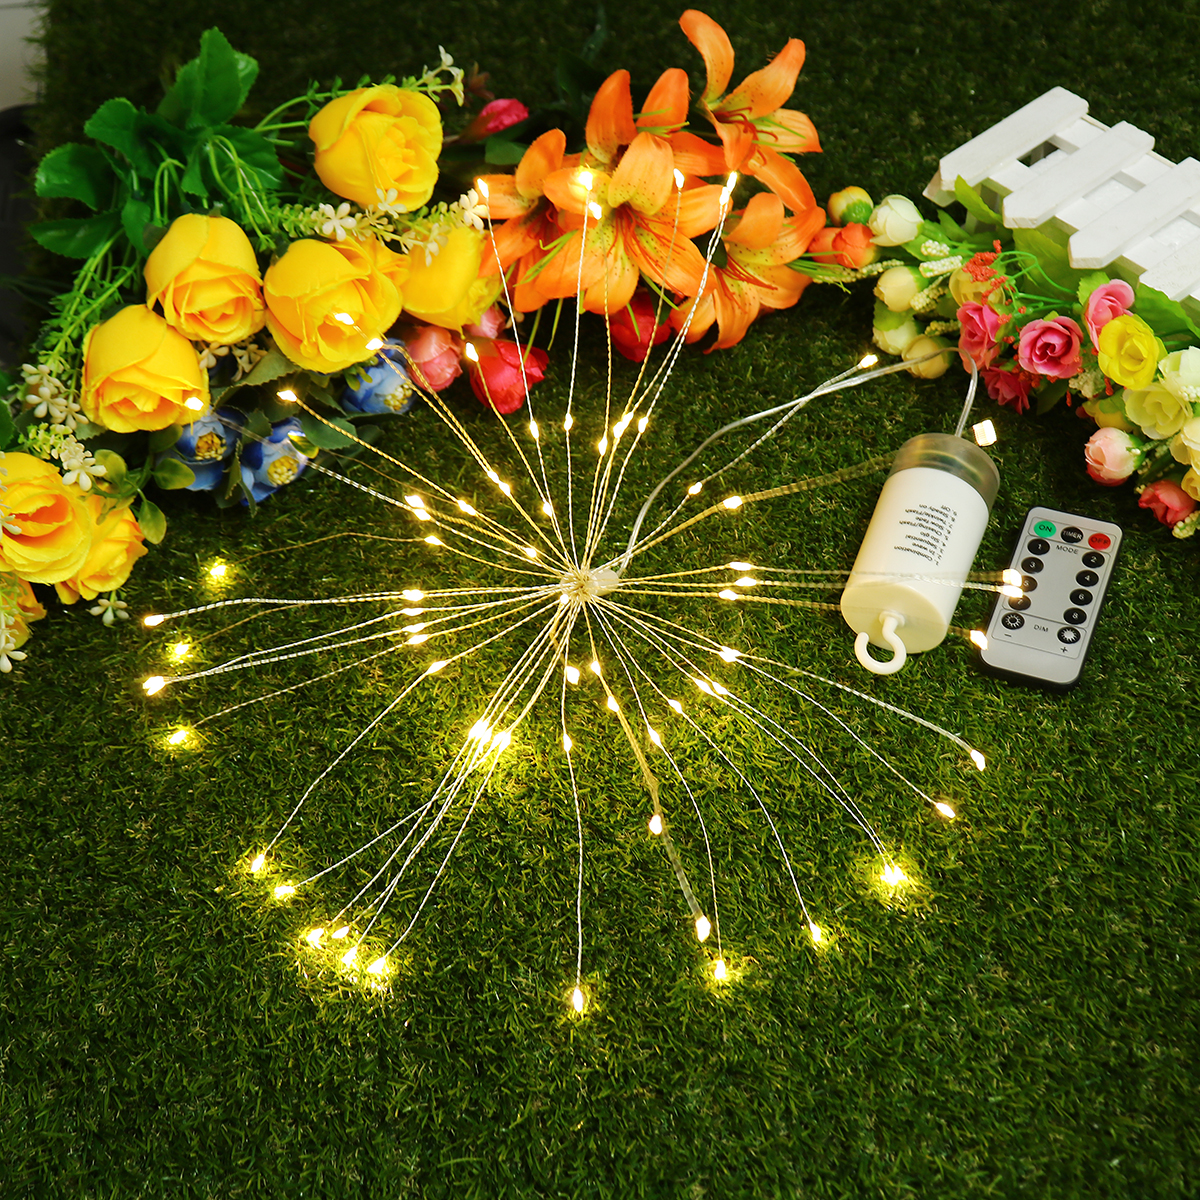 Hanging-LED-Firework-Fairy-String-Light-8Modes-Remote-Home-Party-Wedding-Decor-1691619-5